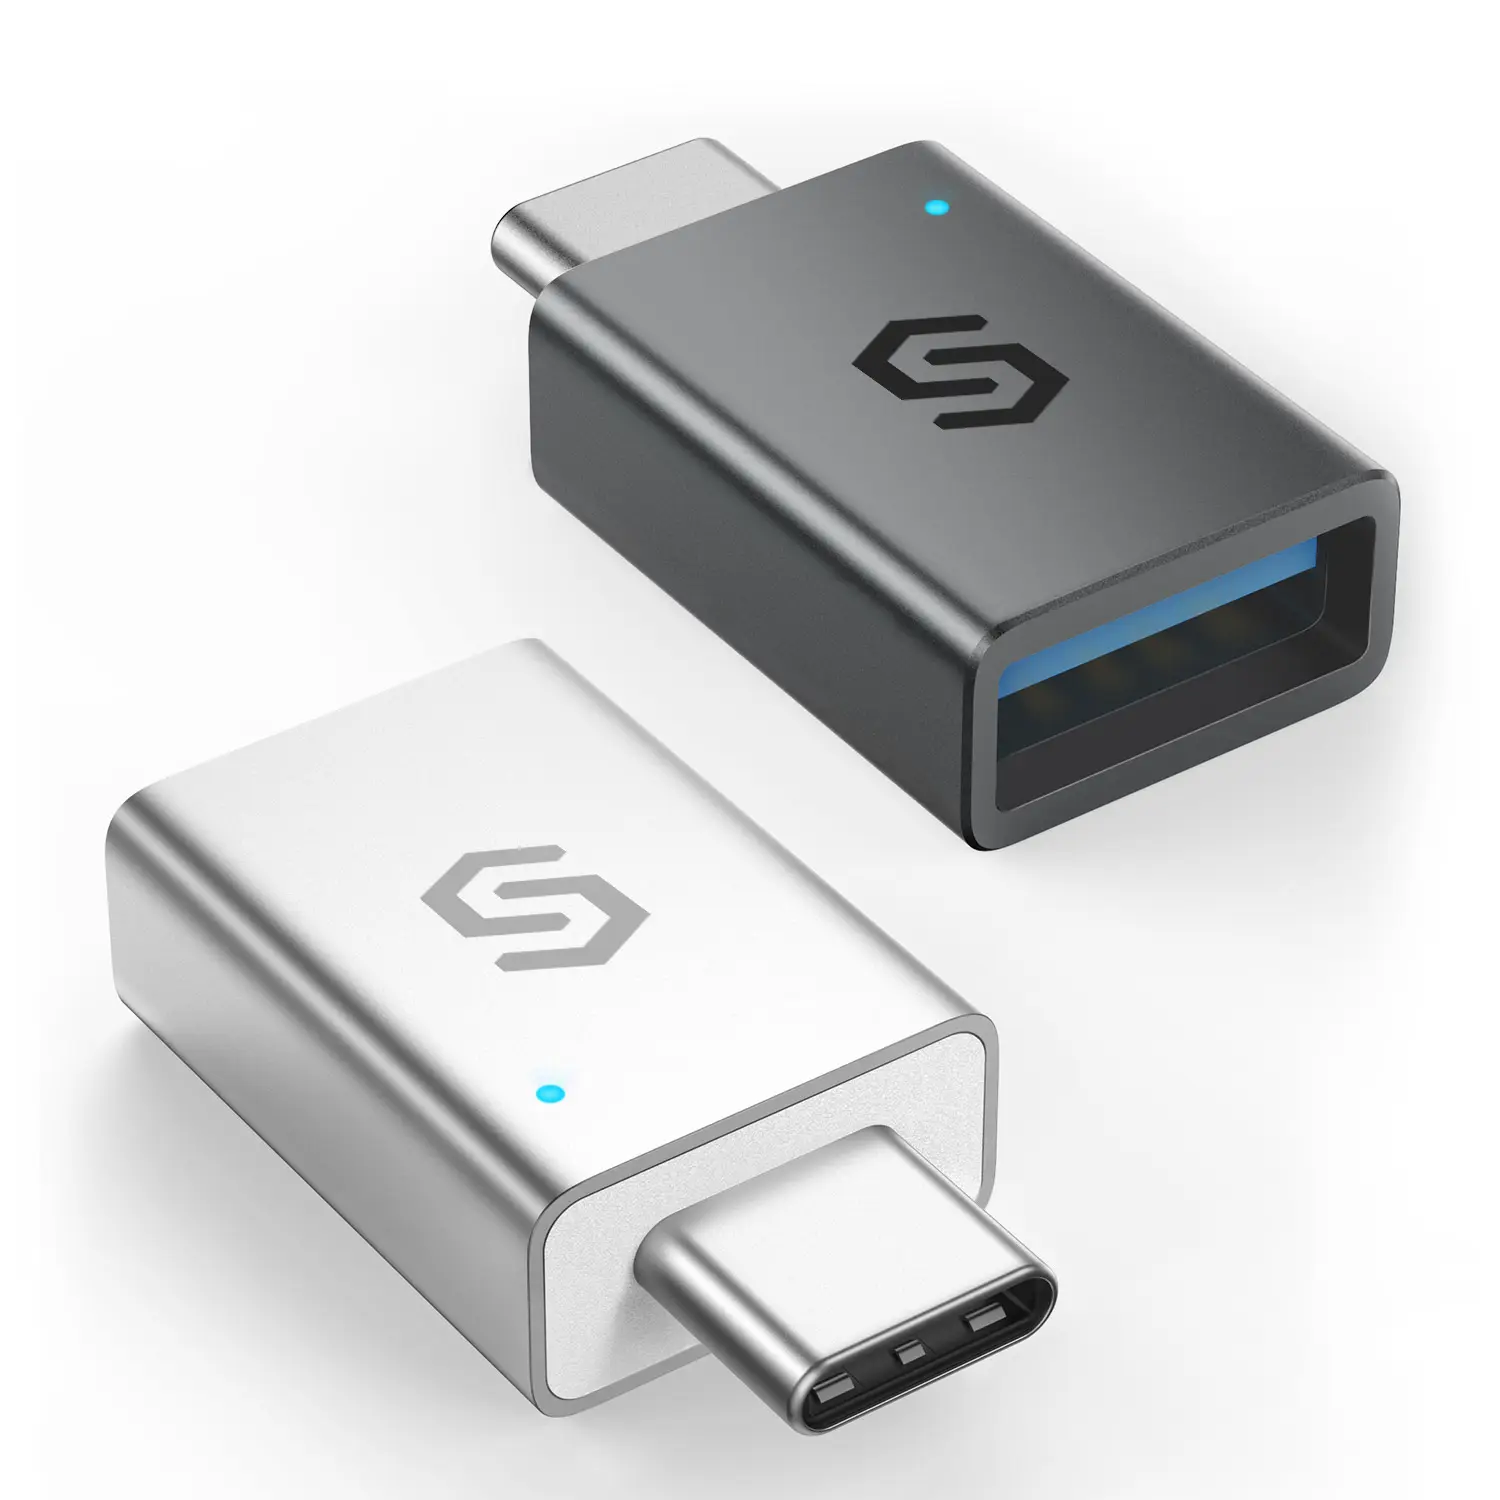 Syncwire USB C 2-pack Type-C to USB 3.0 Female Adapter Thunderbolt 3 Adapter